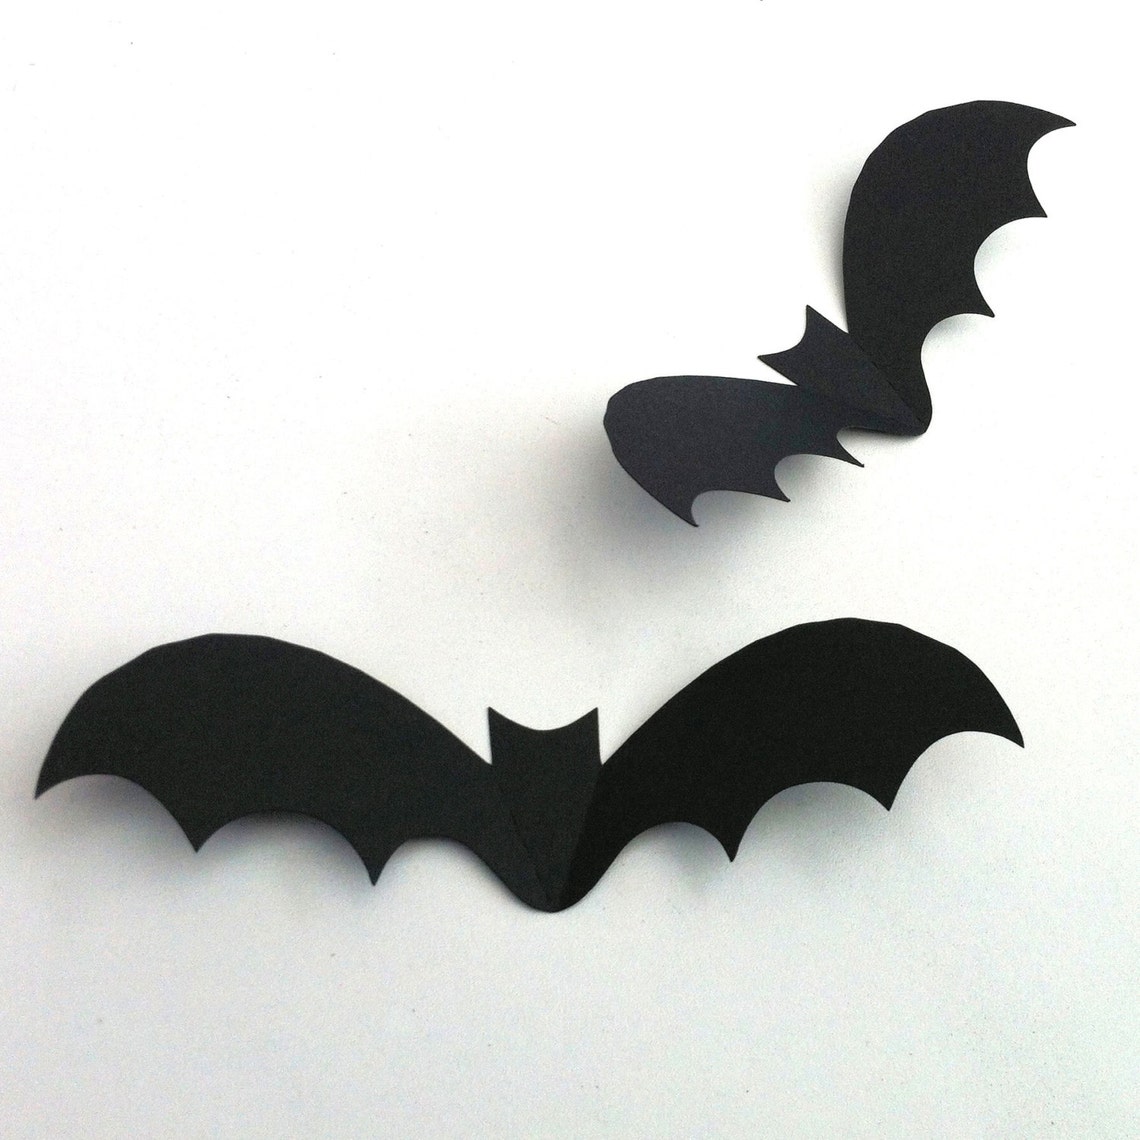 Halloween Bat Shapes Cut-outs. 3D Bat Die Cuts With Fold-up - Etsy